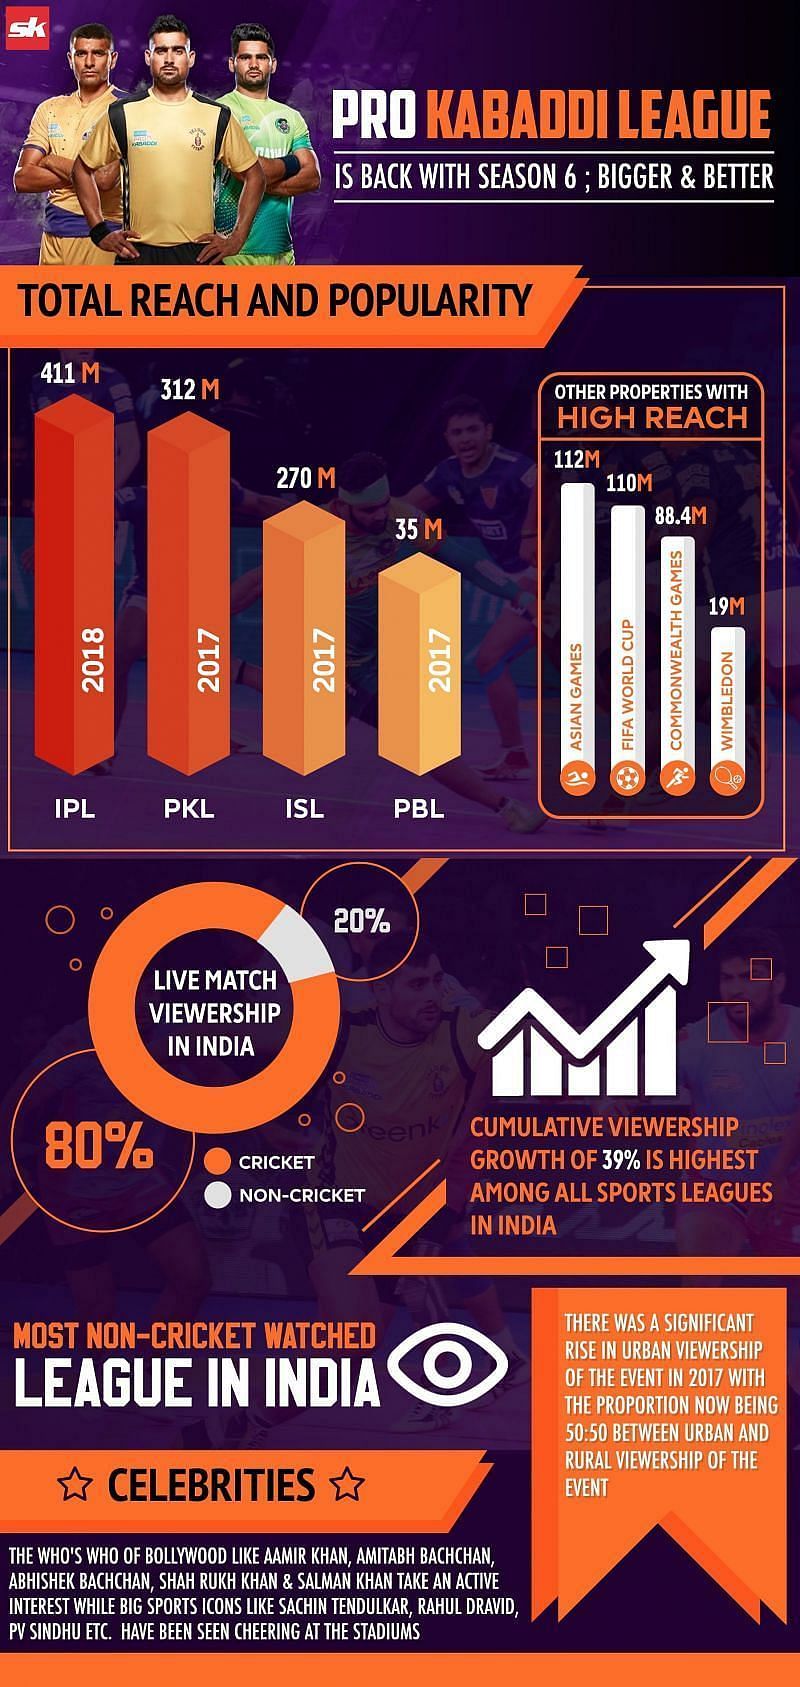 Pro Kabaddi League season 6 was behind only the IPL in terms of total reach and popularity in 2017 (Image via Sportskeeda)